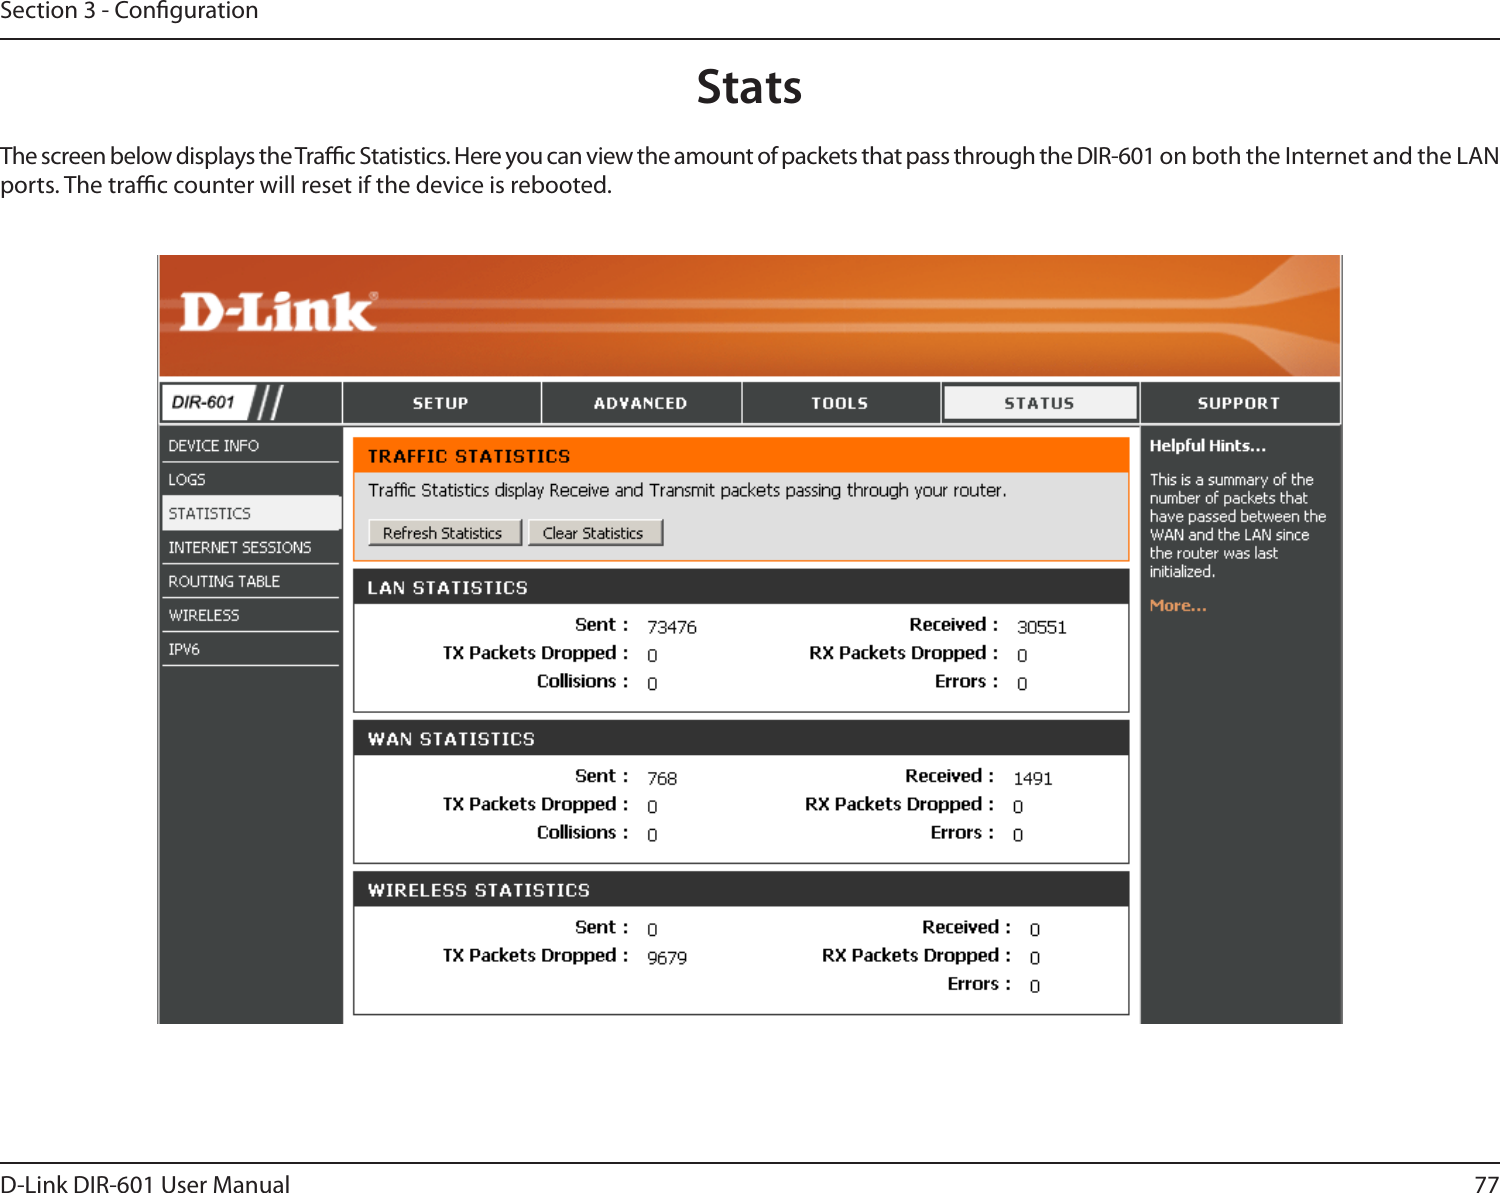 77D-Link DIR-601 User ManualSection 3 - CongurationStatsThe screen below displays the Trac Statistics. Here you can view the amount of packets that pass through the DIR-601 on both the Internet and the LAN ports. The trac counter will reset if the device is rebooted.